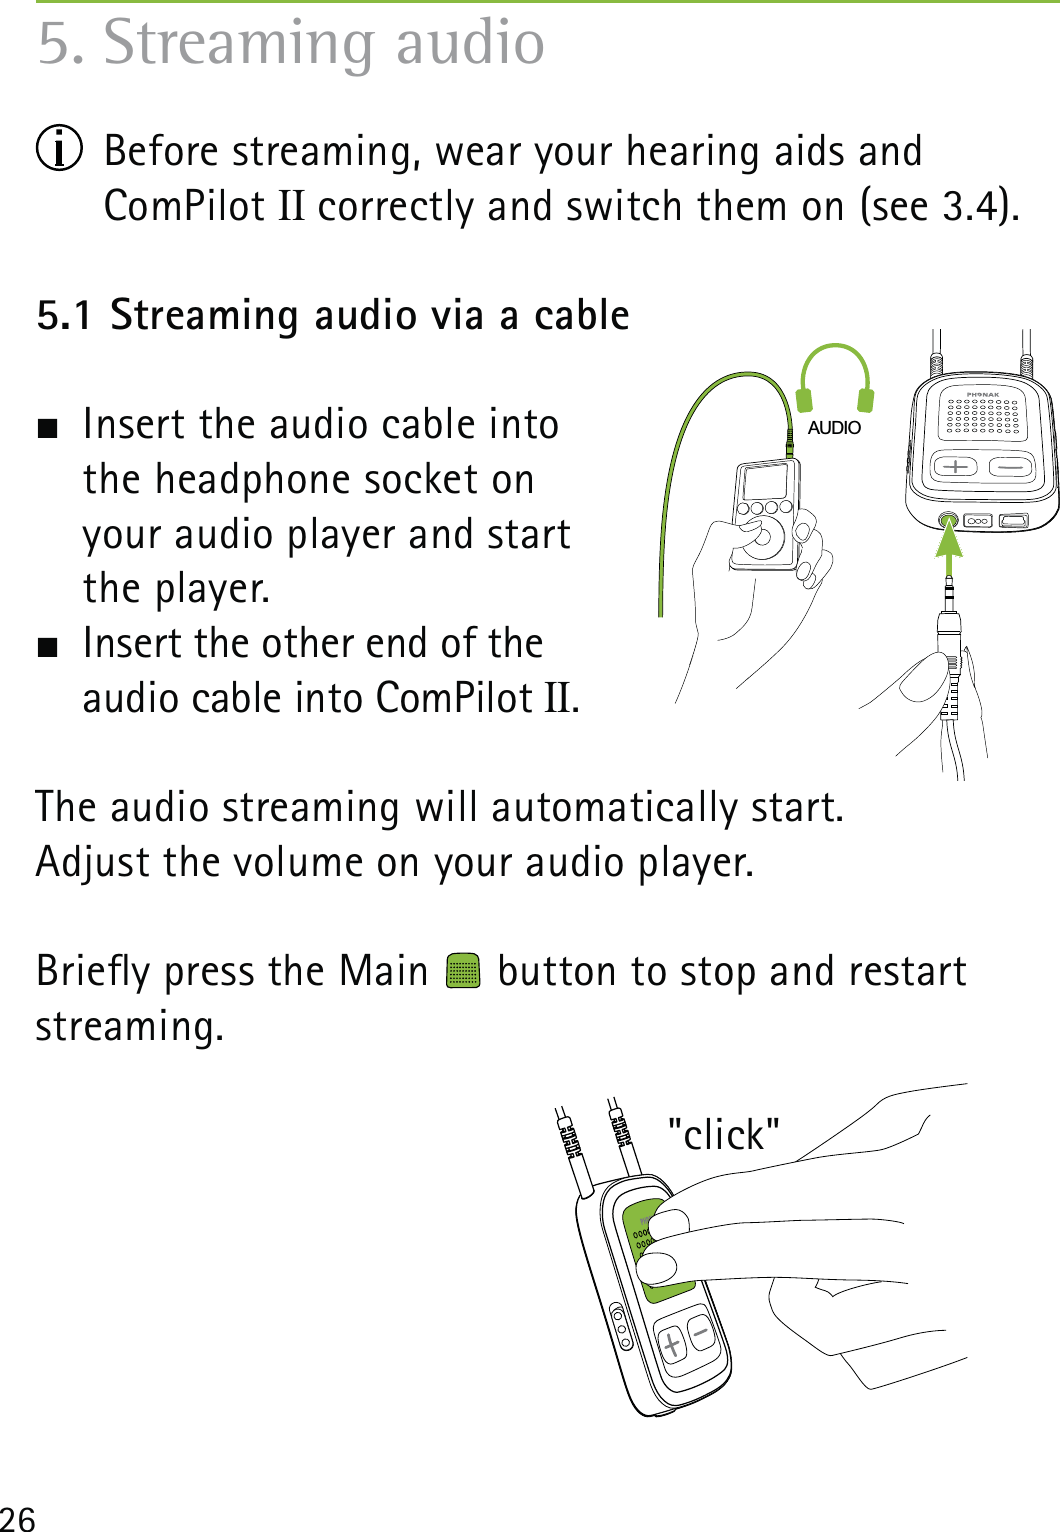 265. Streaming audio  Before streaming, wear your hearing aids and  ComPilot II correctly and switch them on (see 3.4).5.1 Streaming audio via a cable  Insert the audio cable into  the headphone socket on  your audio player and start  the player.  Insert the other end of the  audio cable into ComPilot II.The audio streaming will automatically start.Adjust the volume on your audio player.Briey press the Main   button to stop and restart streaming.AUDIO&quot;click&quot;